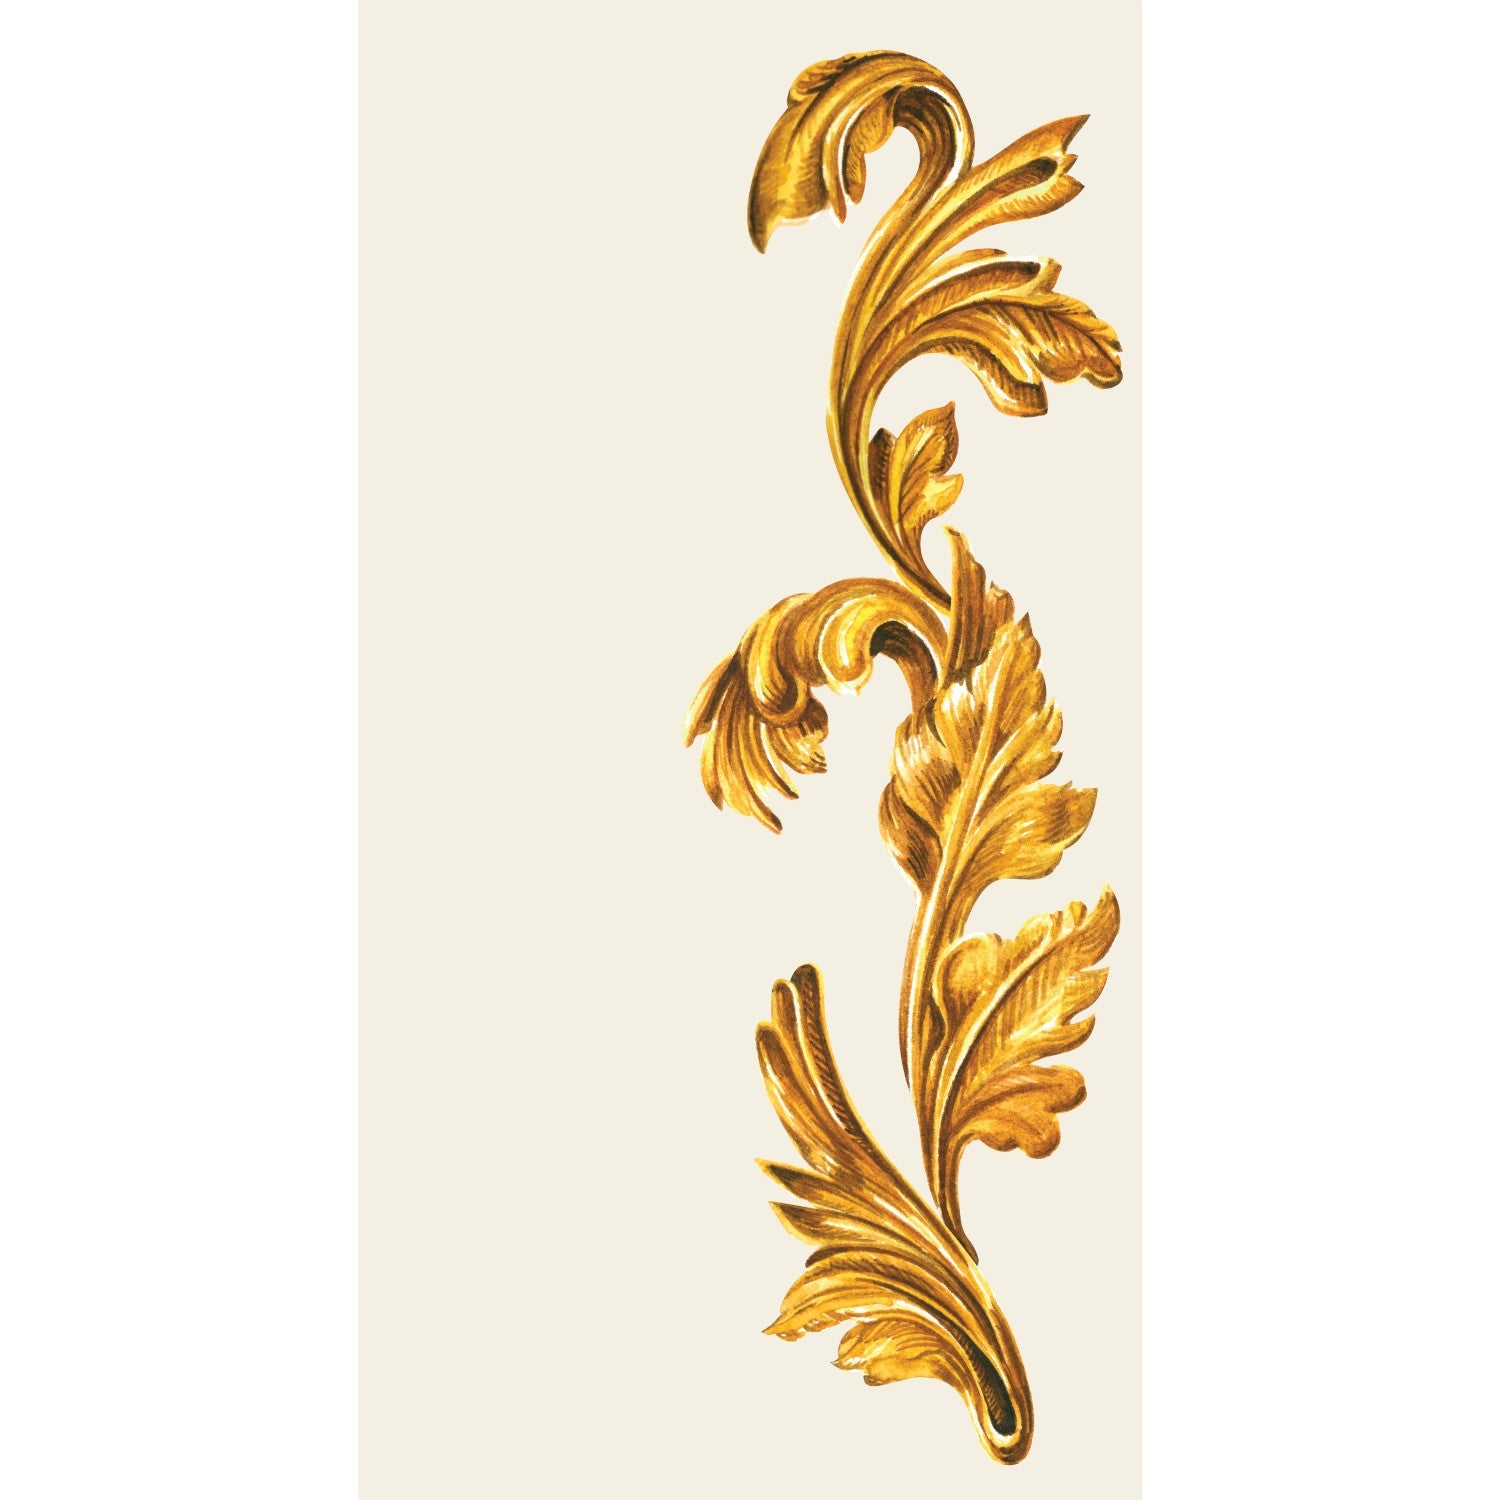 A Gold Flora Napkins leafy design on a white background, perfect for a table setting at a party.